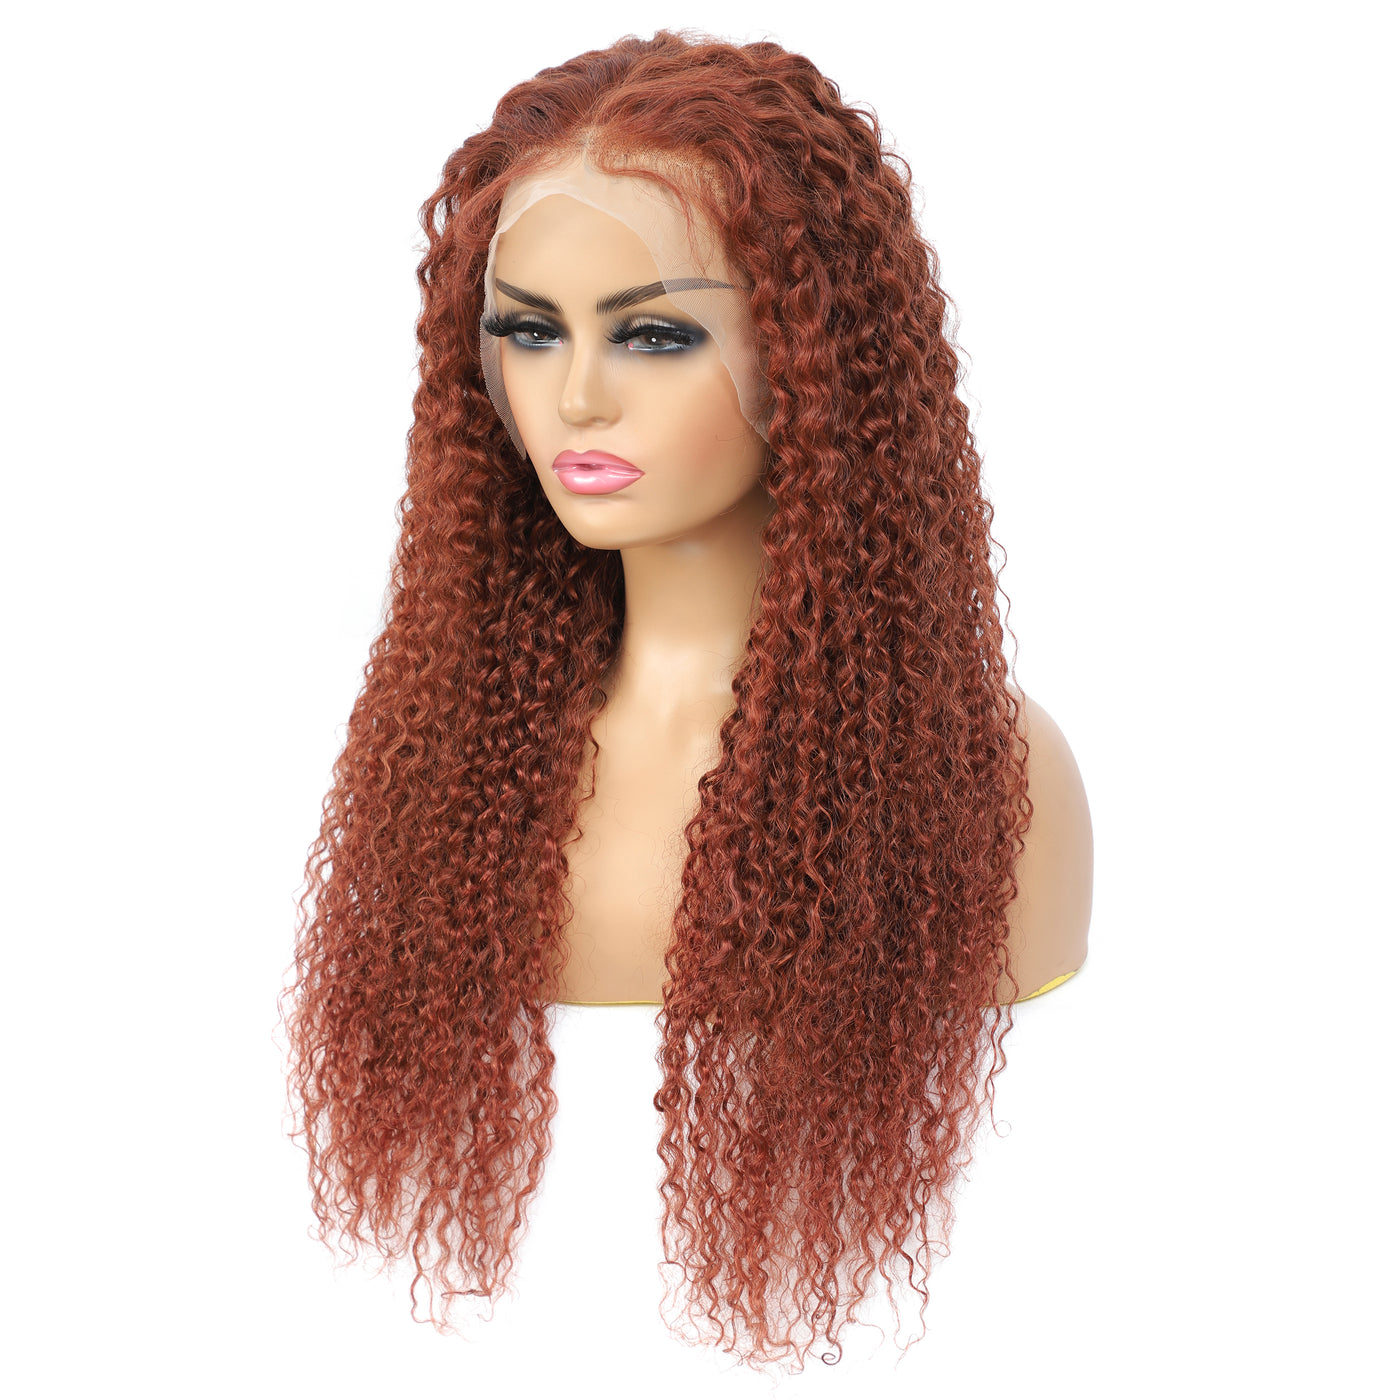 Auburn Brown 33 Colored Kinky Curly Human Hair 13X4 Lace Front Wigs